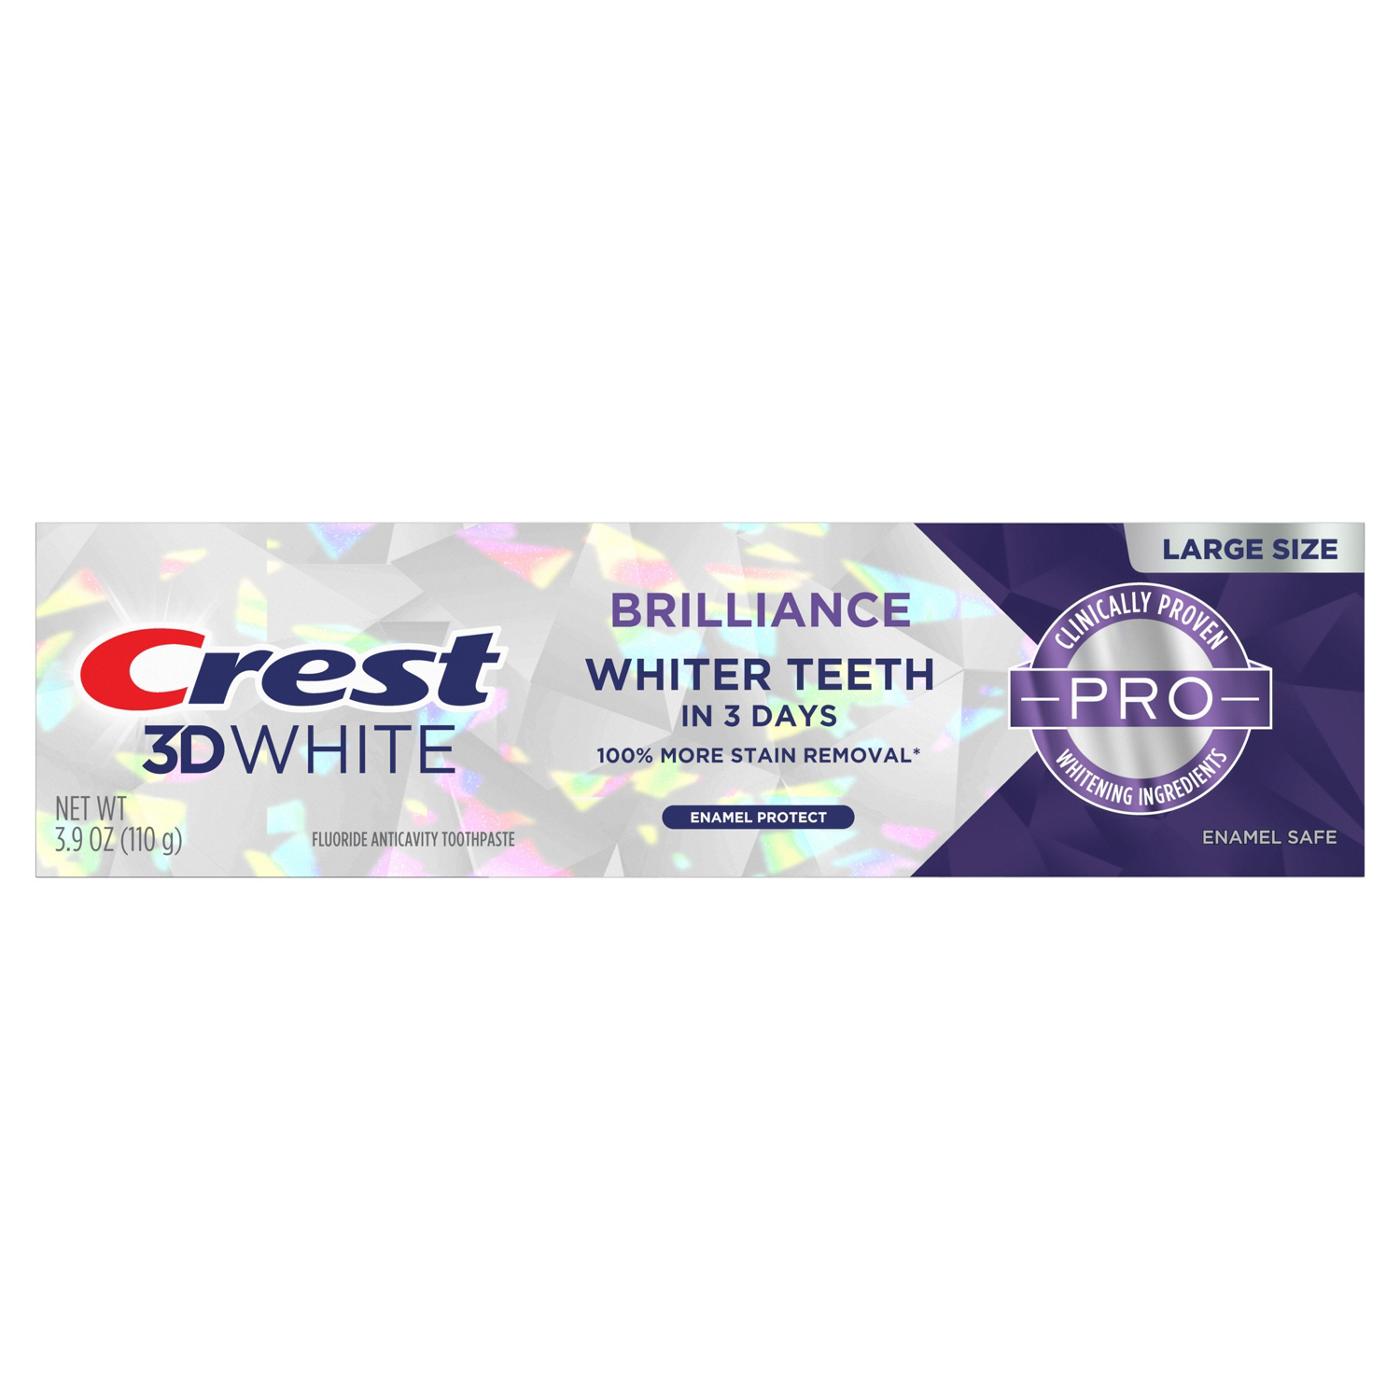 Crest 3D White Brilliance Toothpaste - Enamel Protect; image 1 of 8